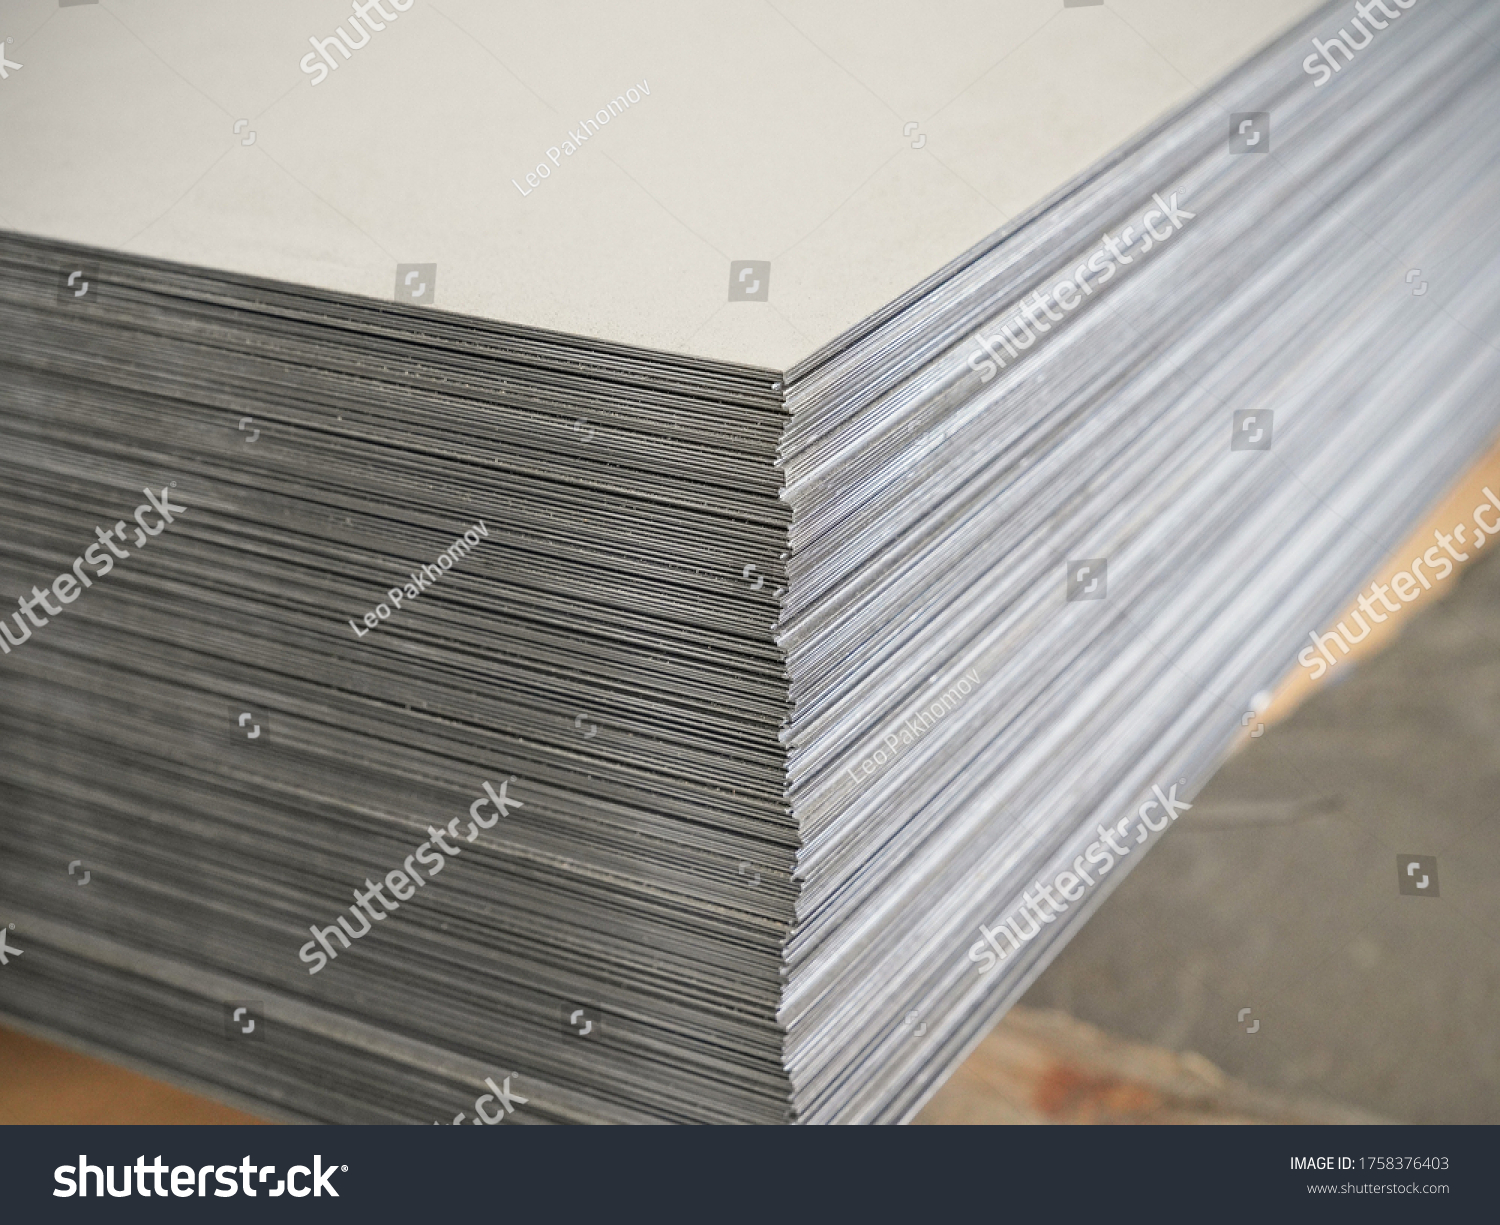 Many steel sheets in stock #1758376403